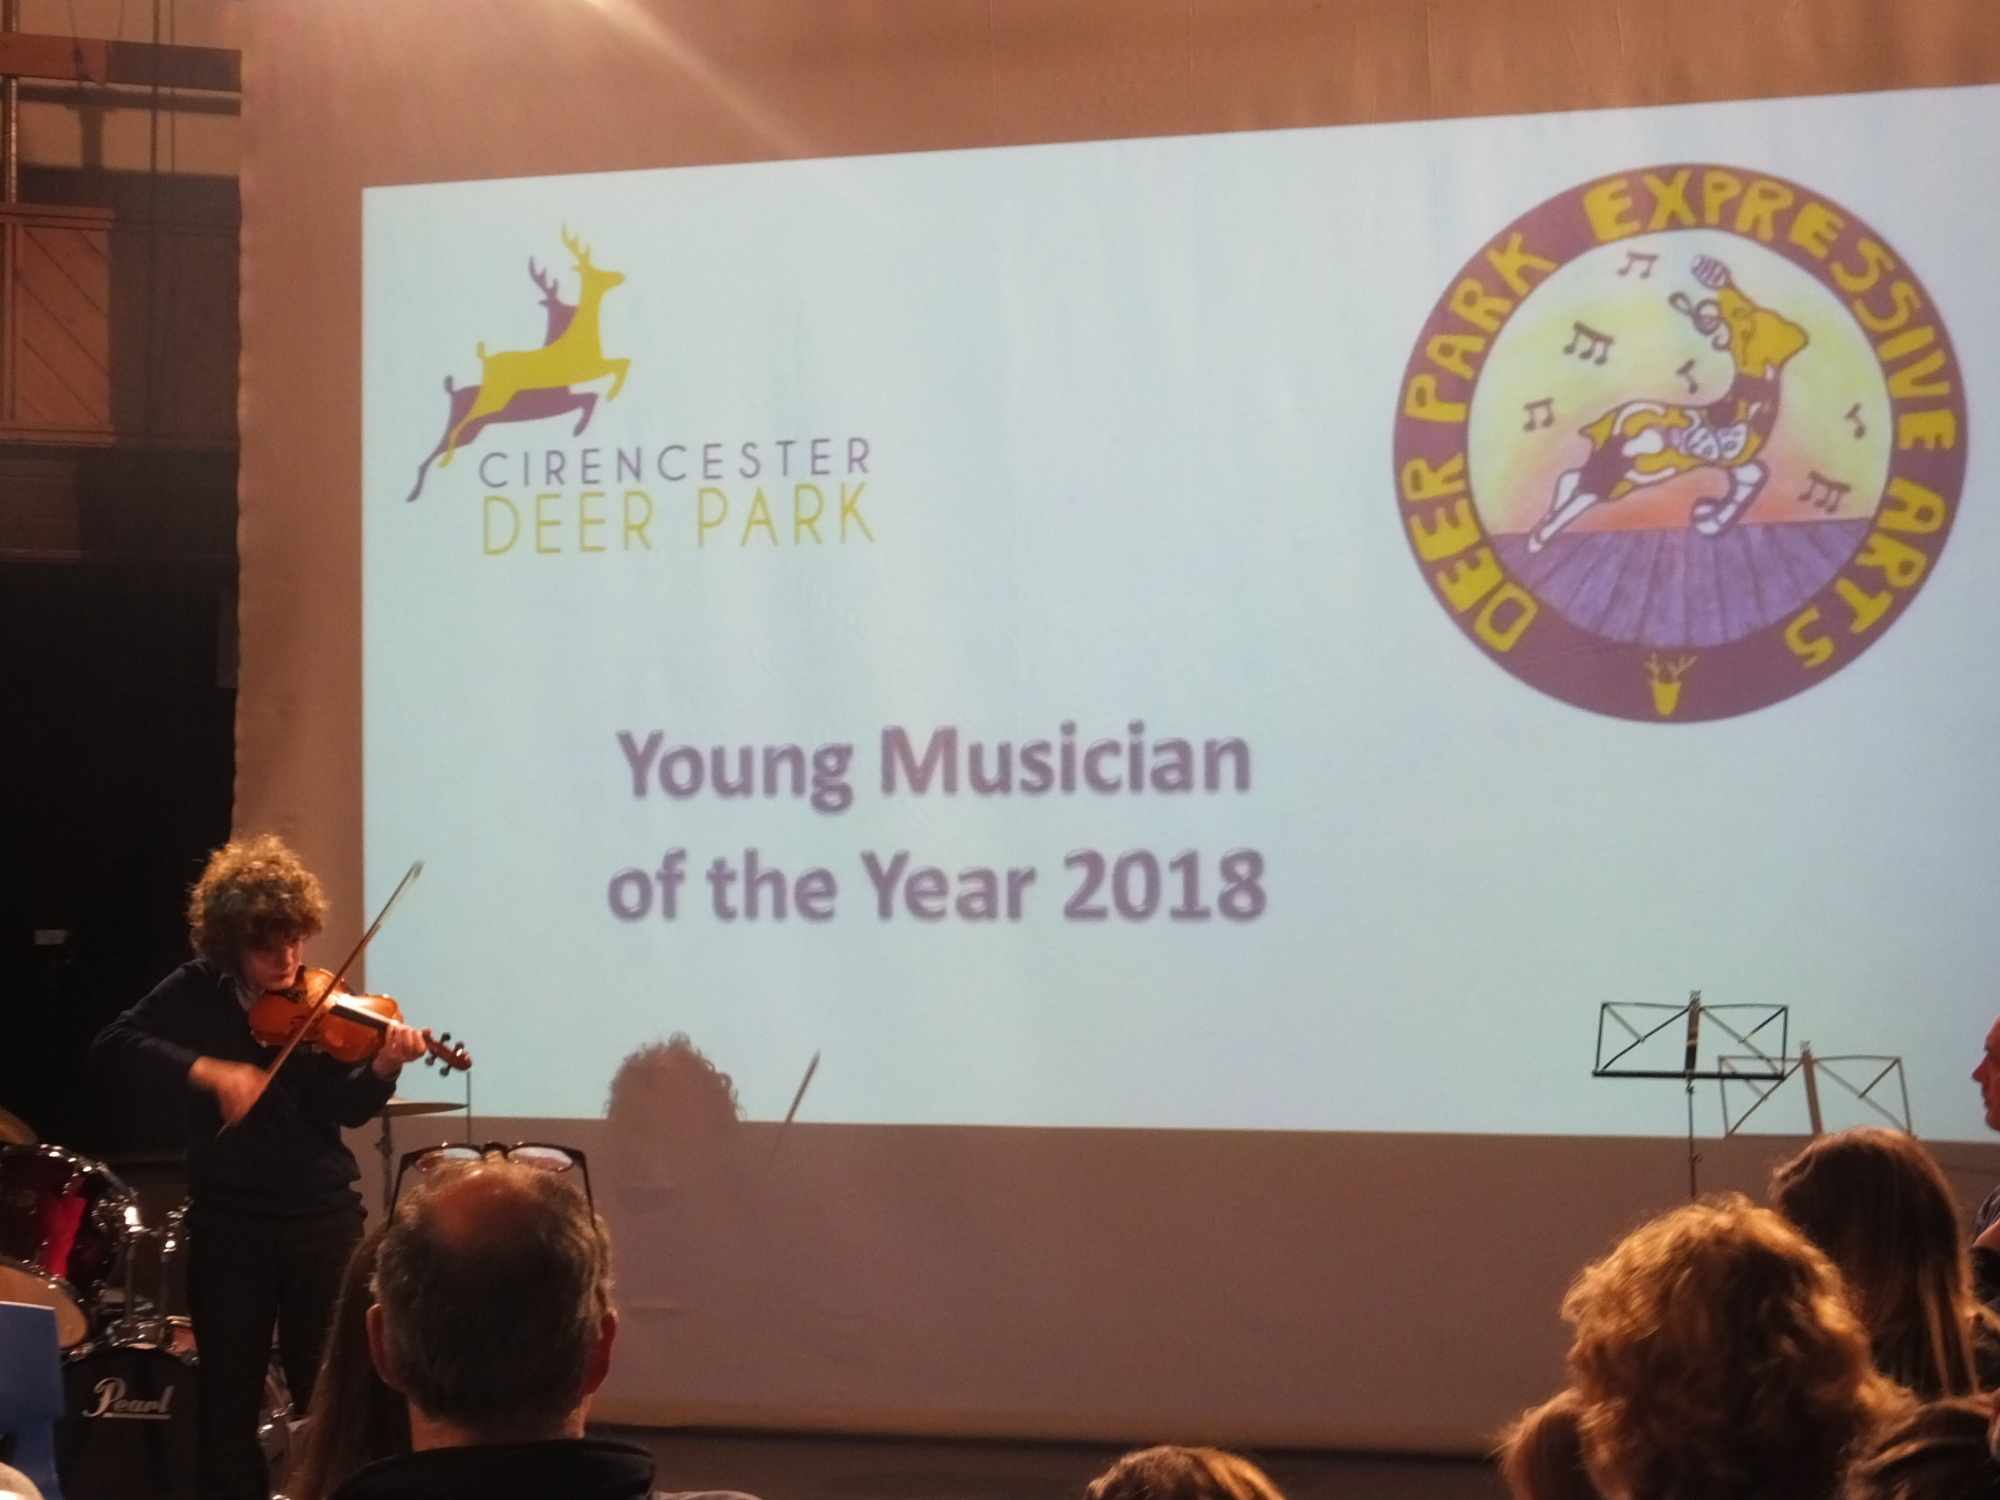 Young Musician of the Year 2018